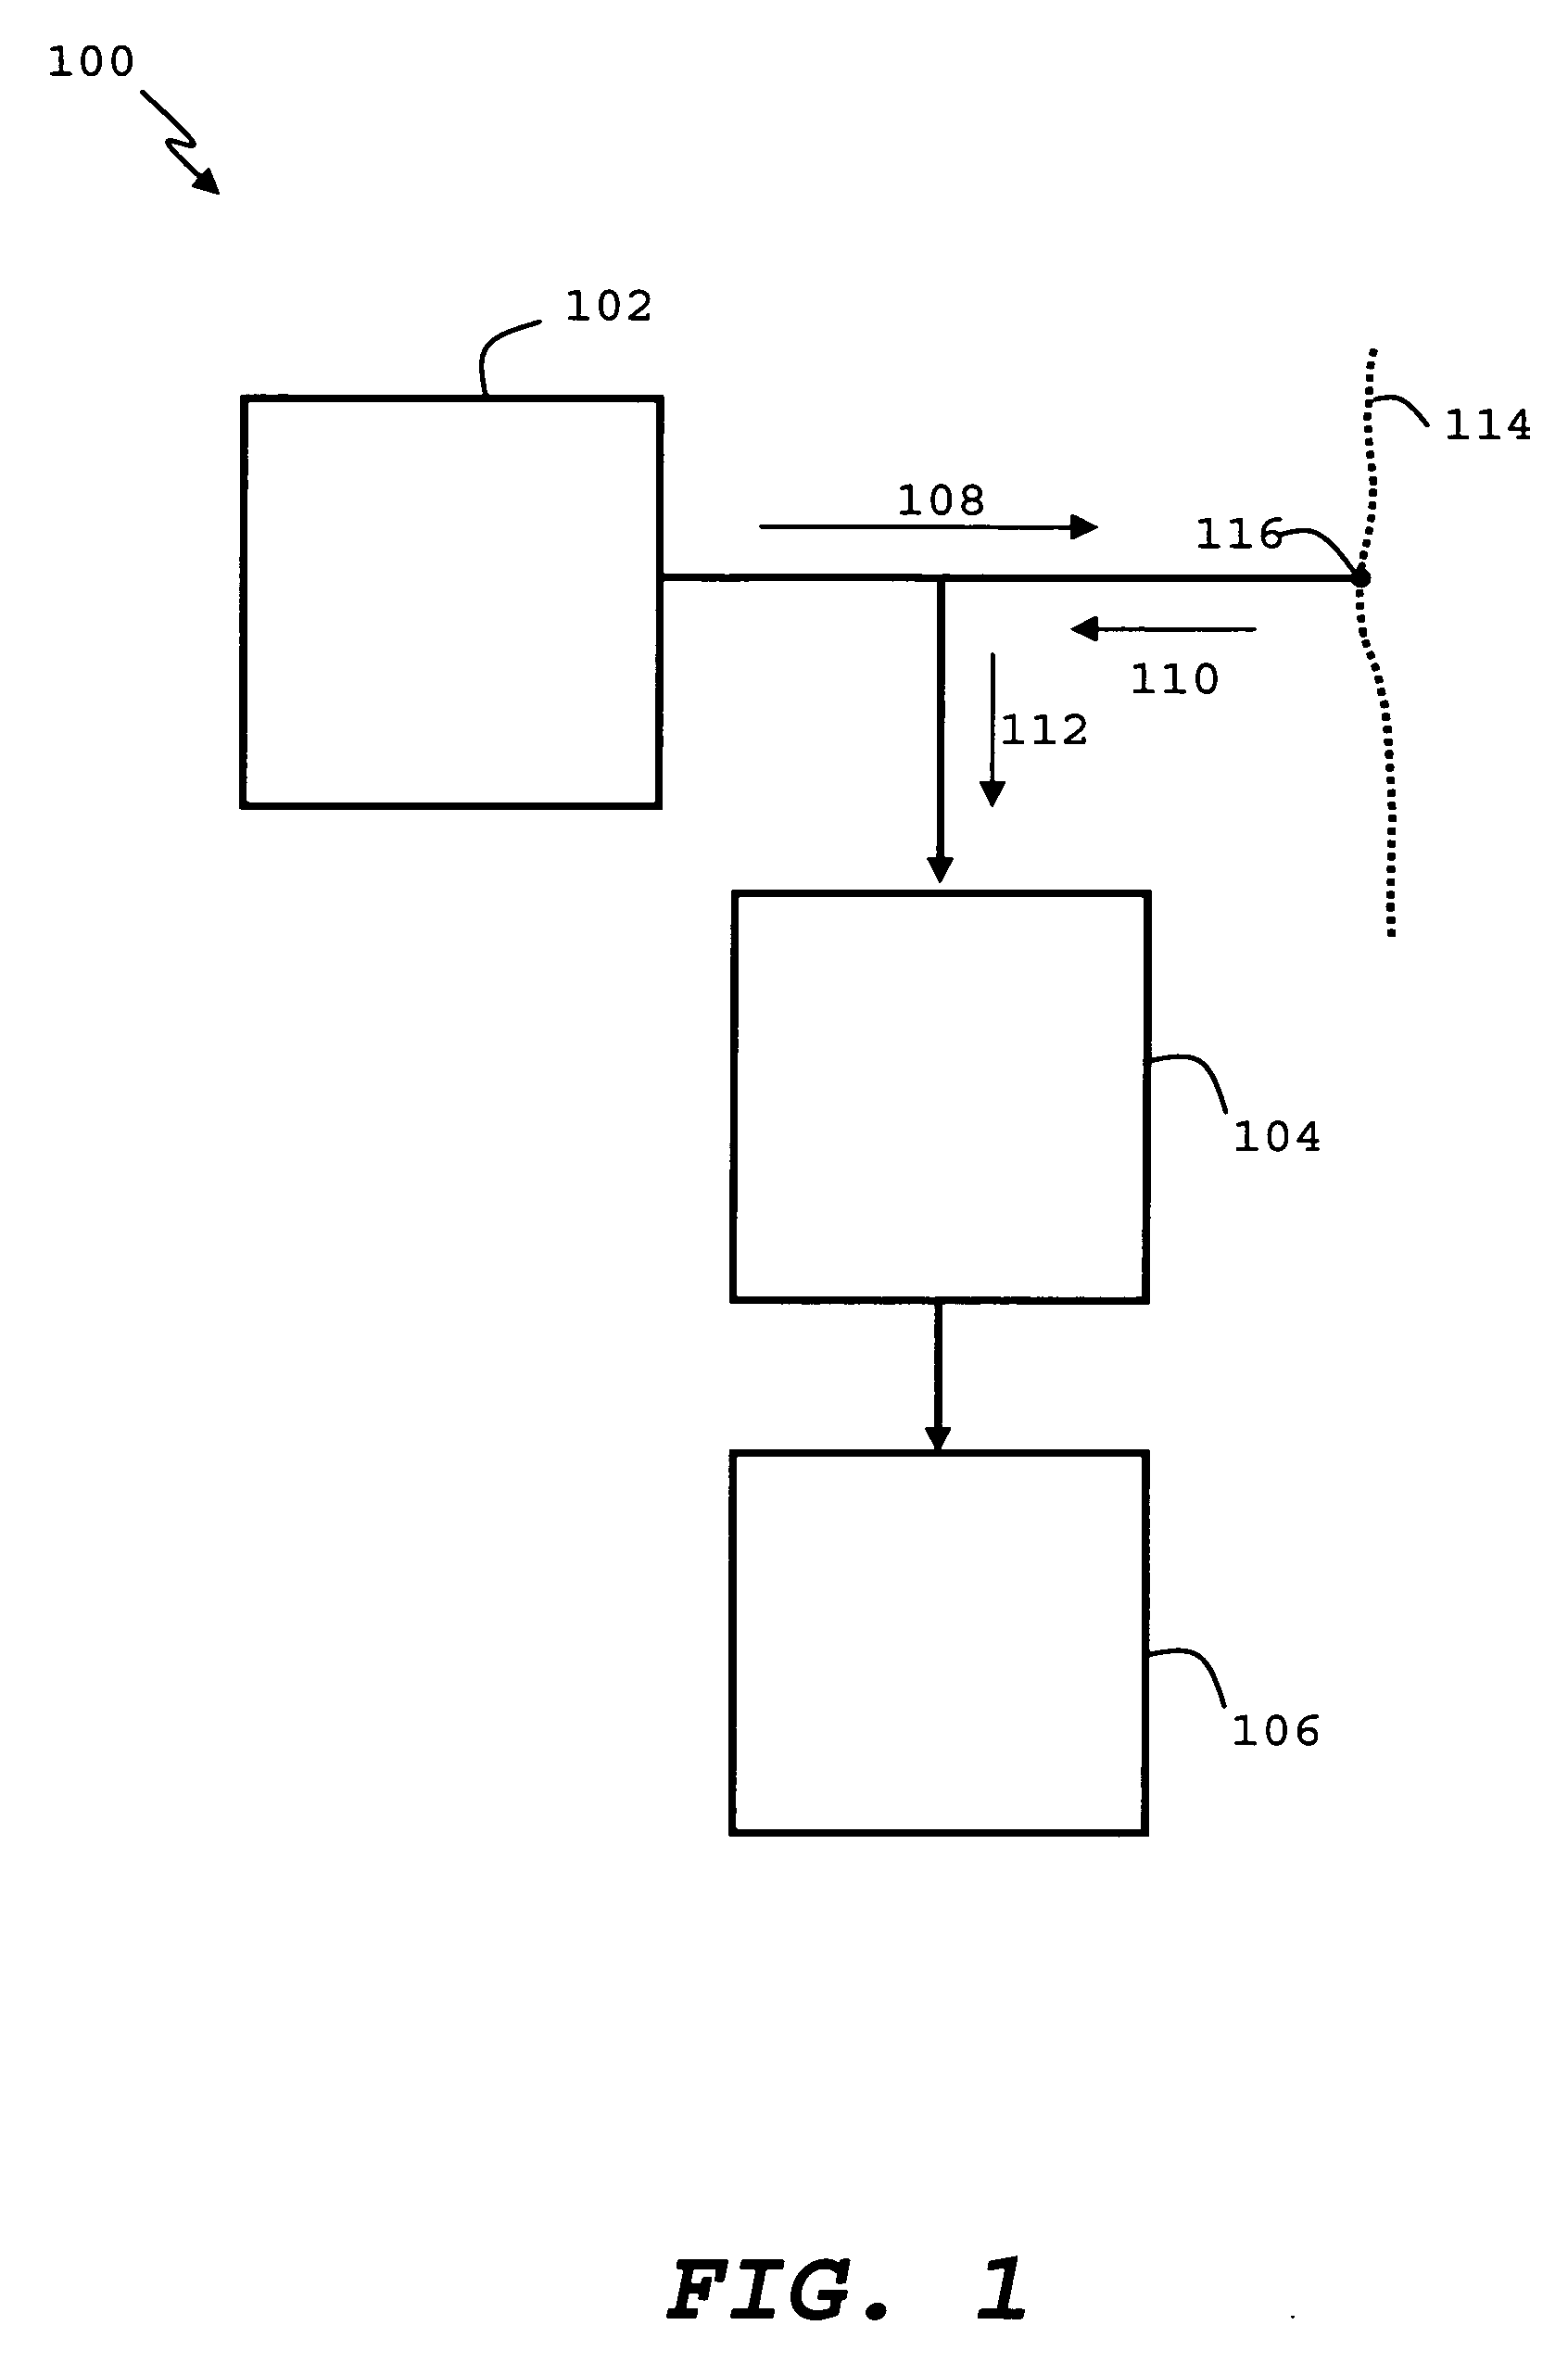 Apparatus and method for testing a signal path from an injection point